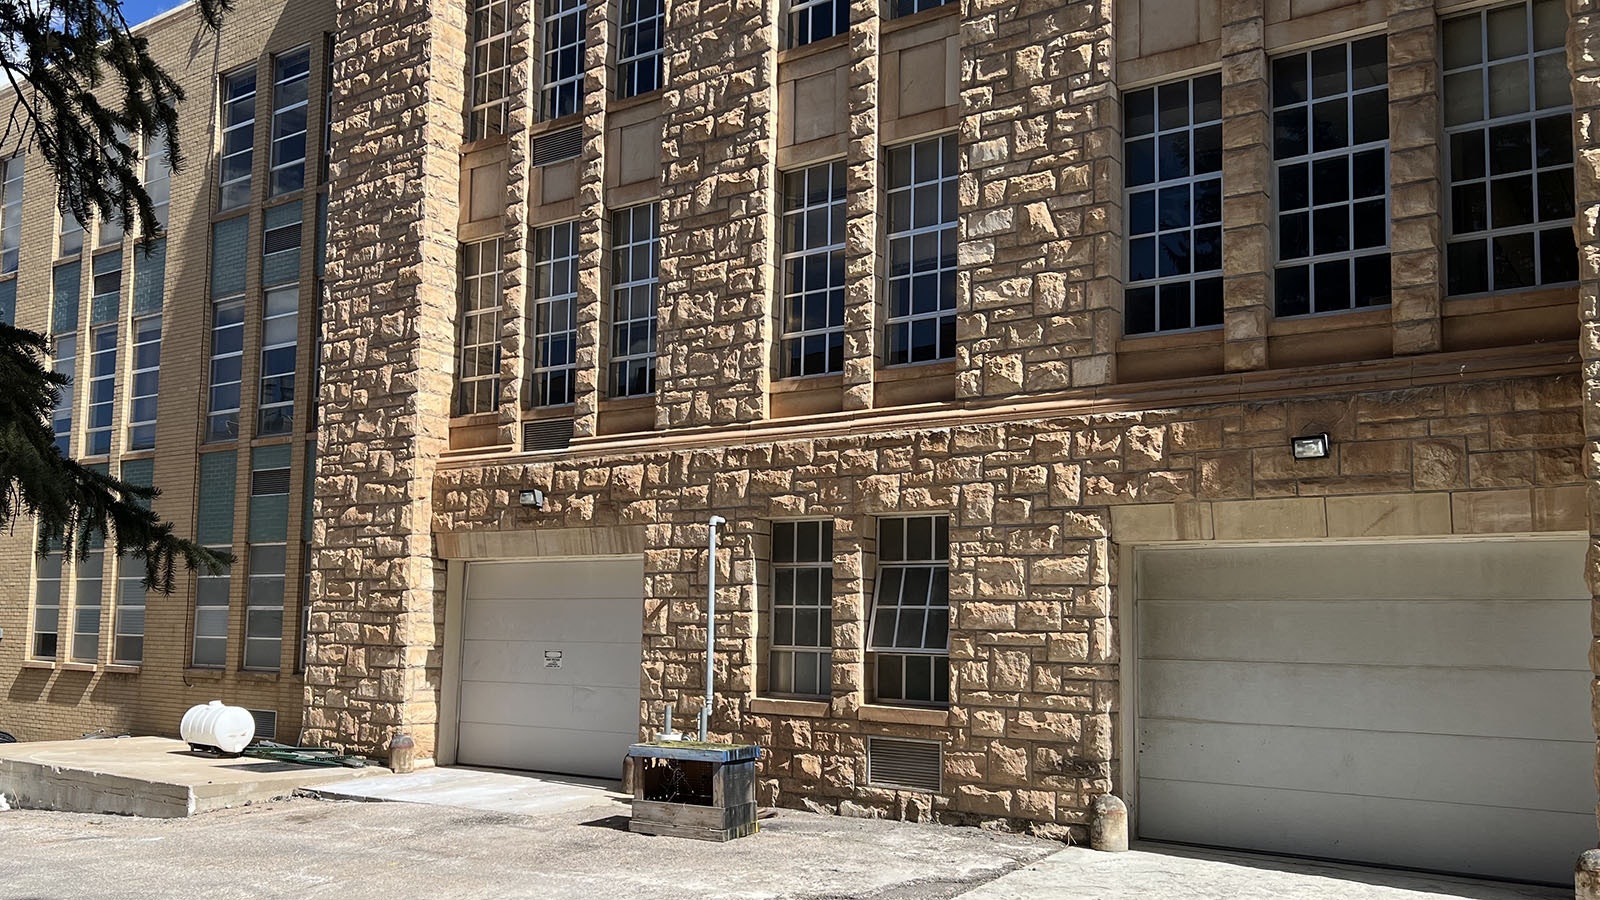 The original sandstone facade remains on the old engineering building on the University of Wyoming campus, including the freight doors where the nuclear reactor was brought through 50 years ago.